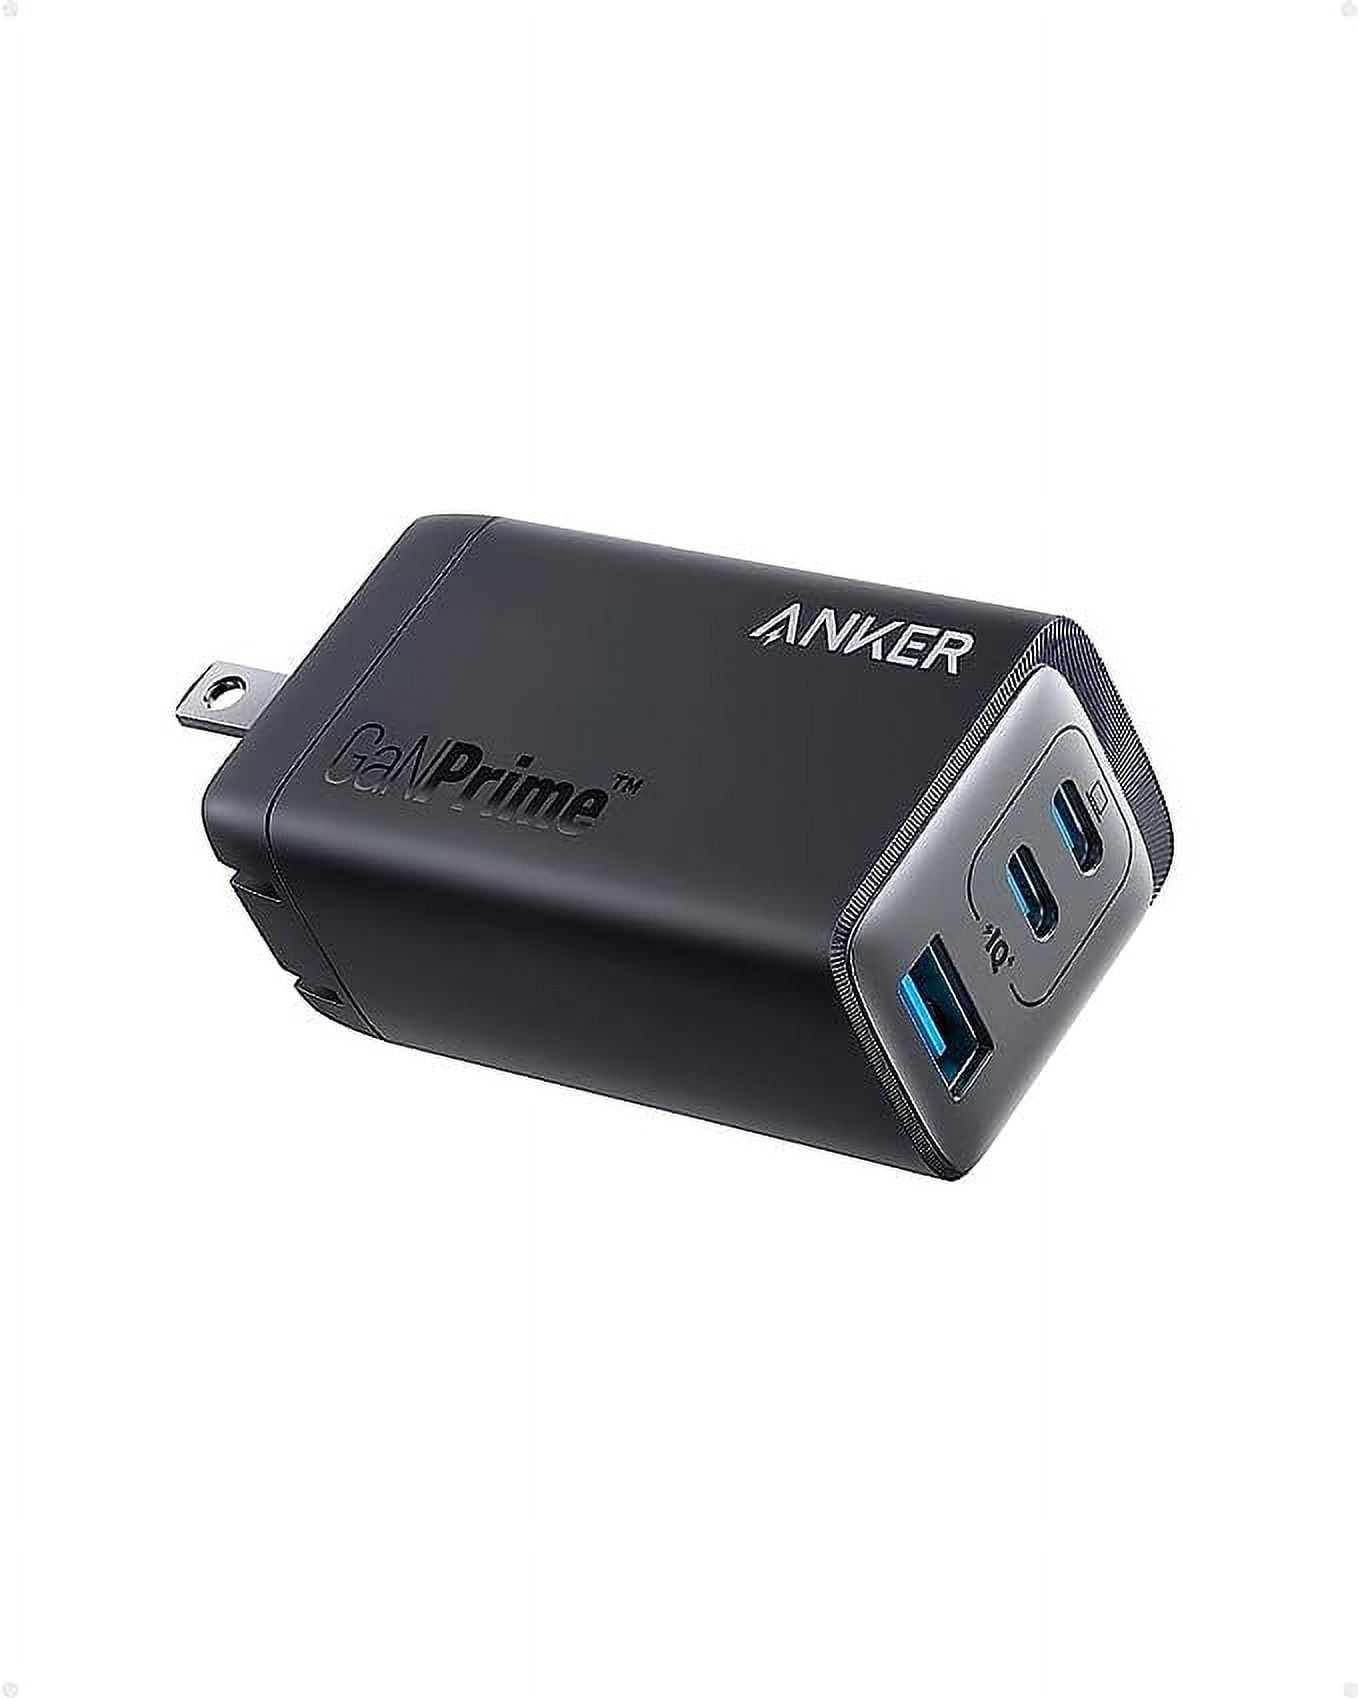 Anker's Nano II USB-C Chargers Pack Up to 65W of Power in a